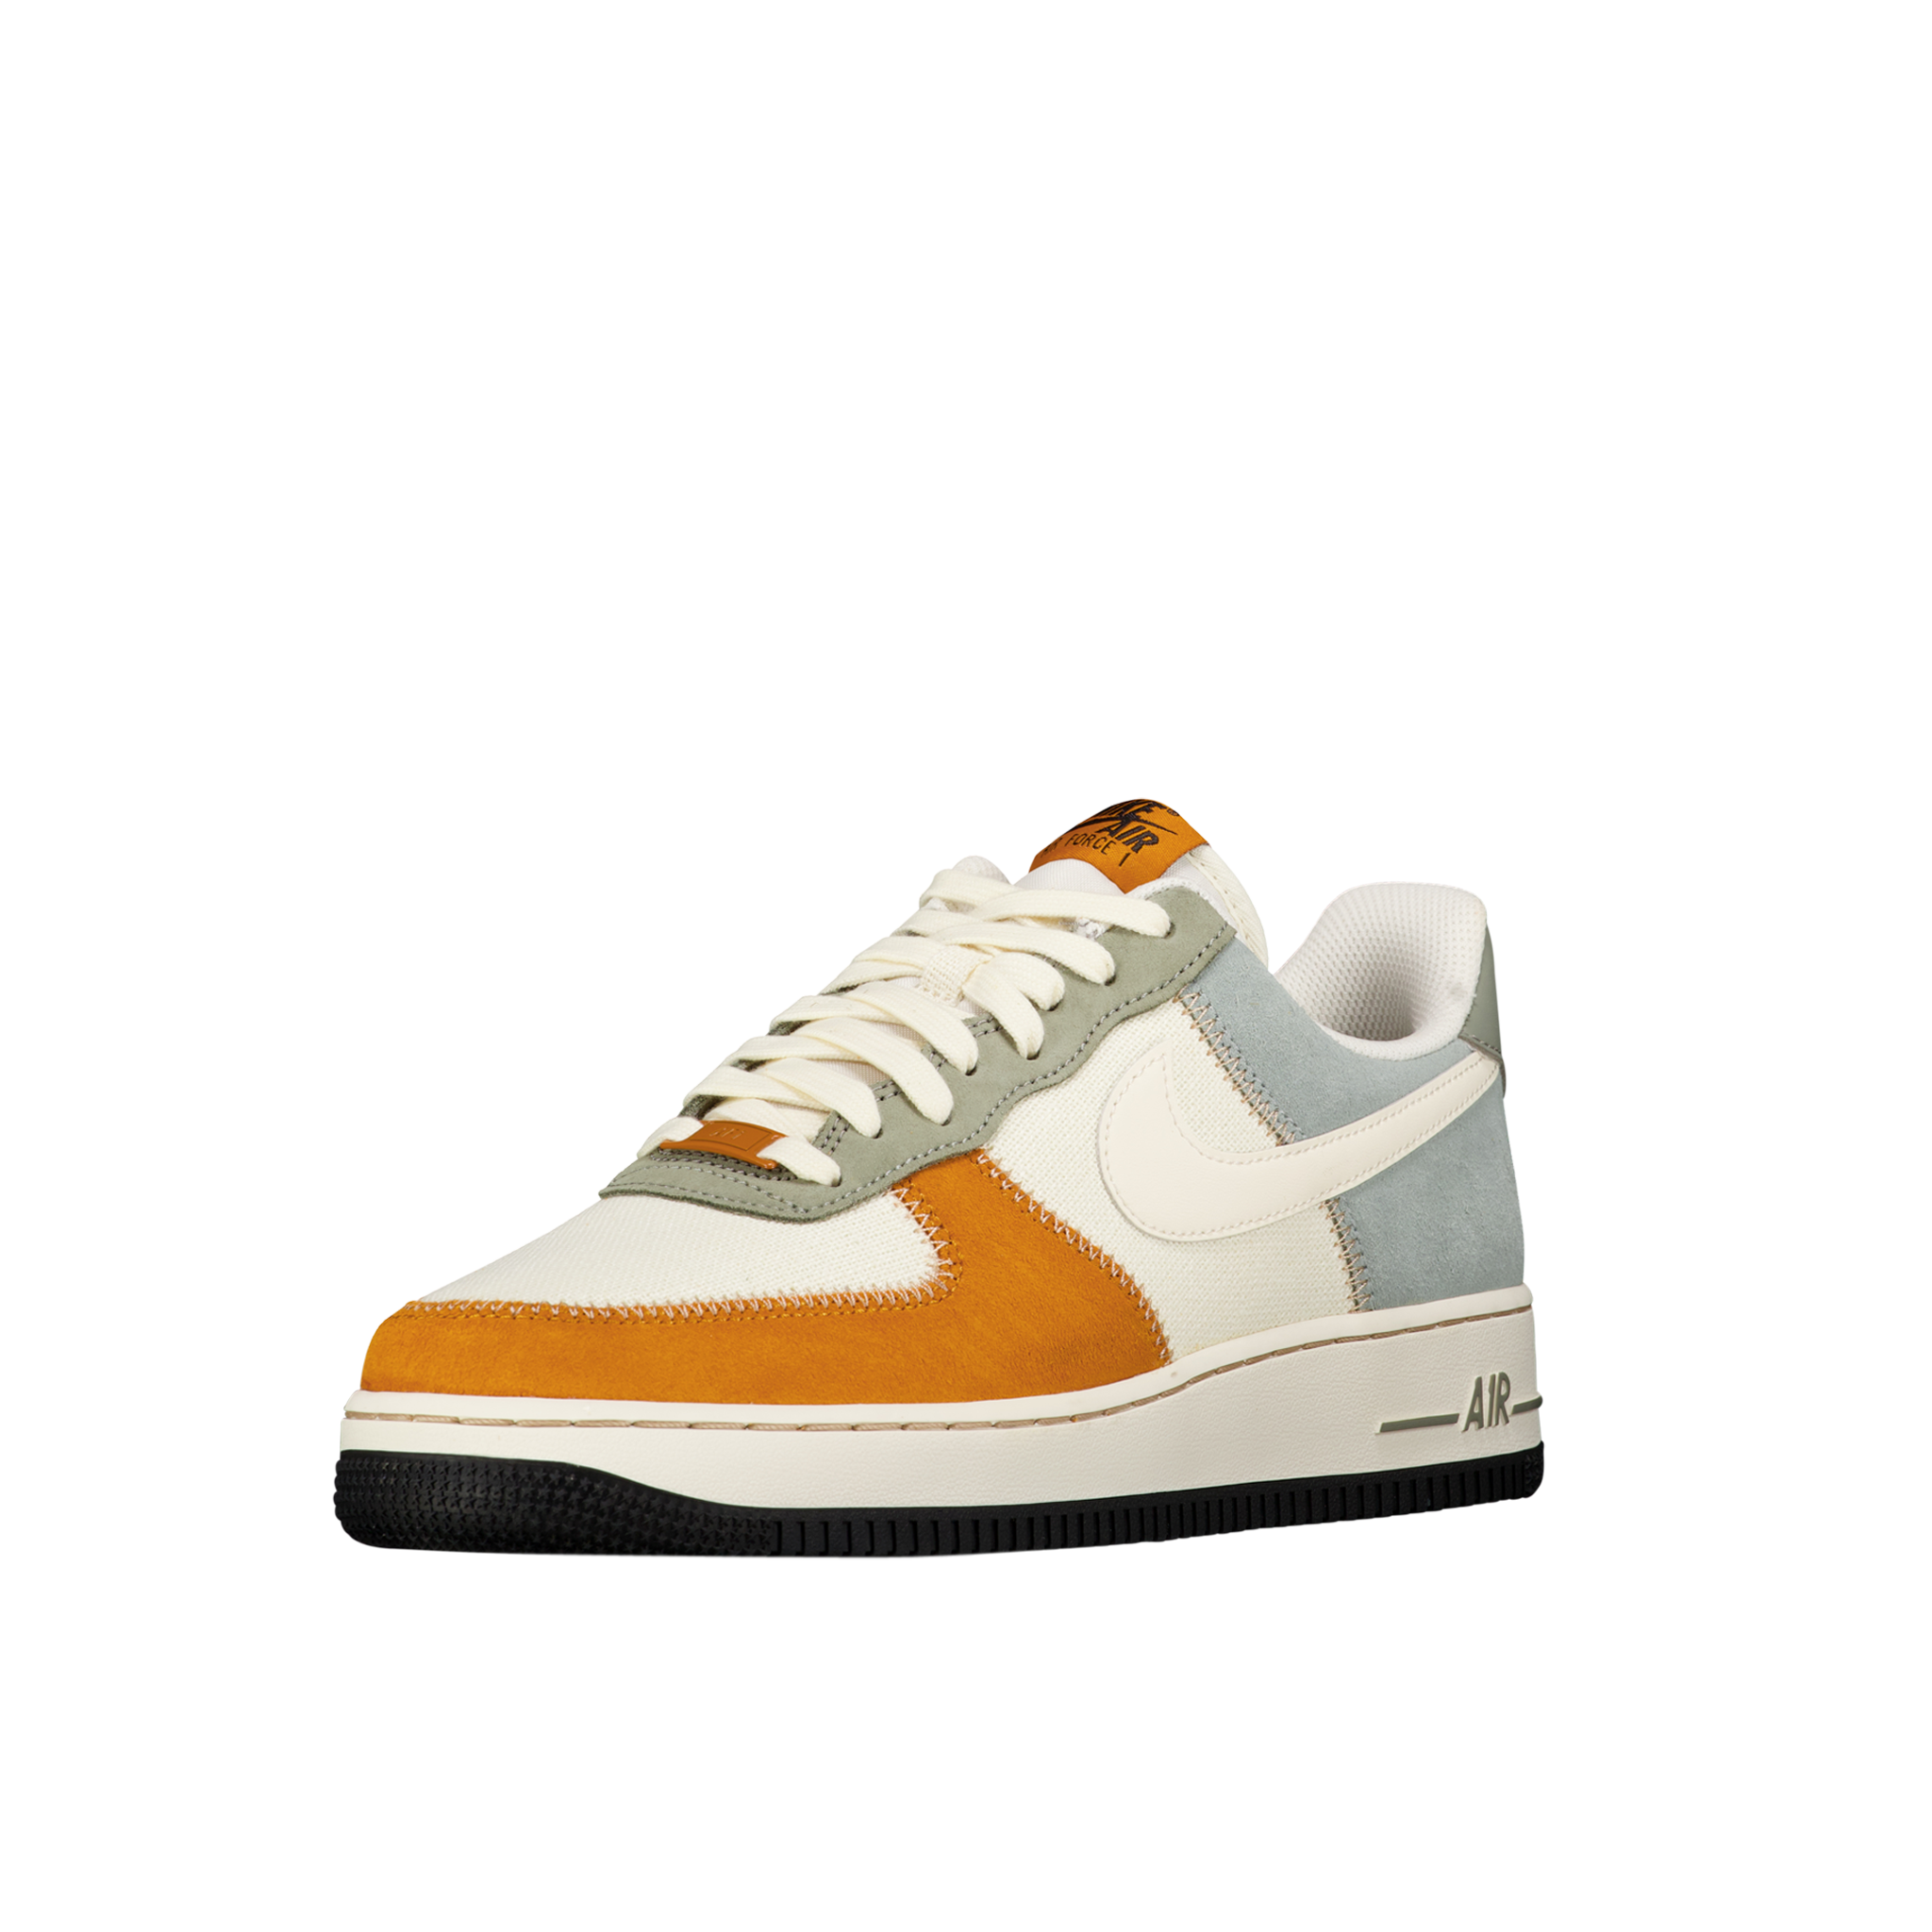 Air Force 1 '07 Lv8 'Pale Ivory'